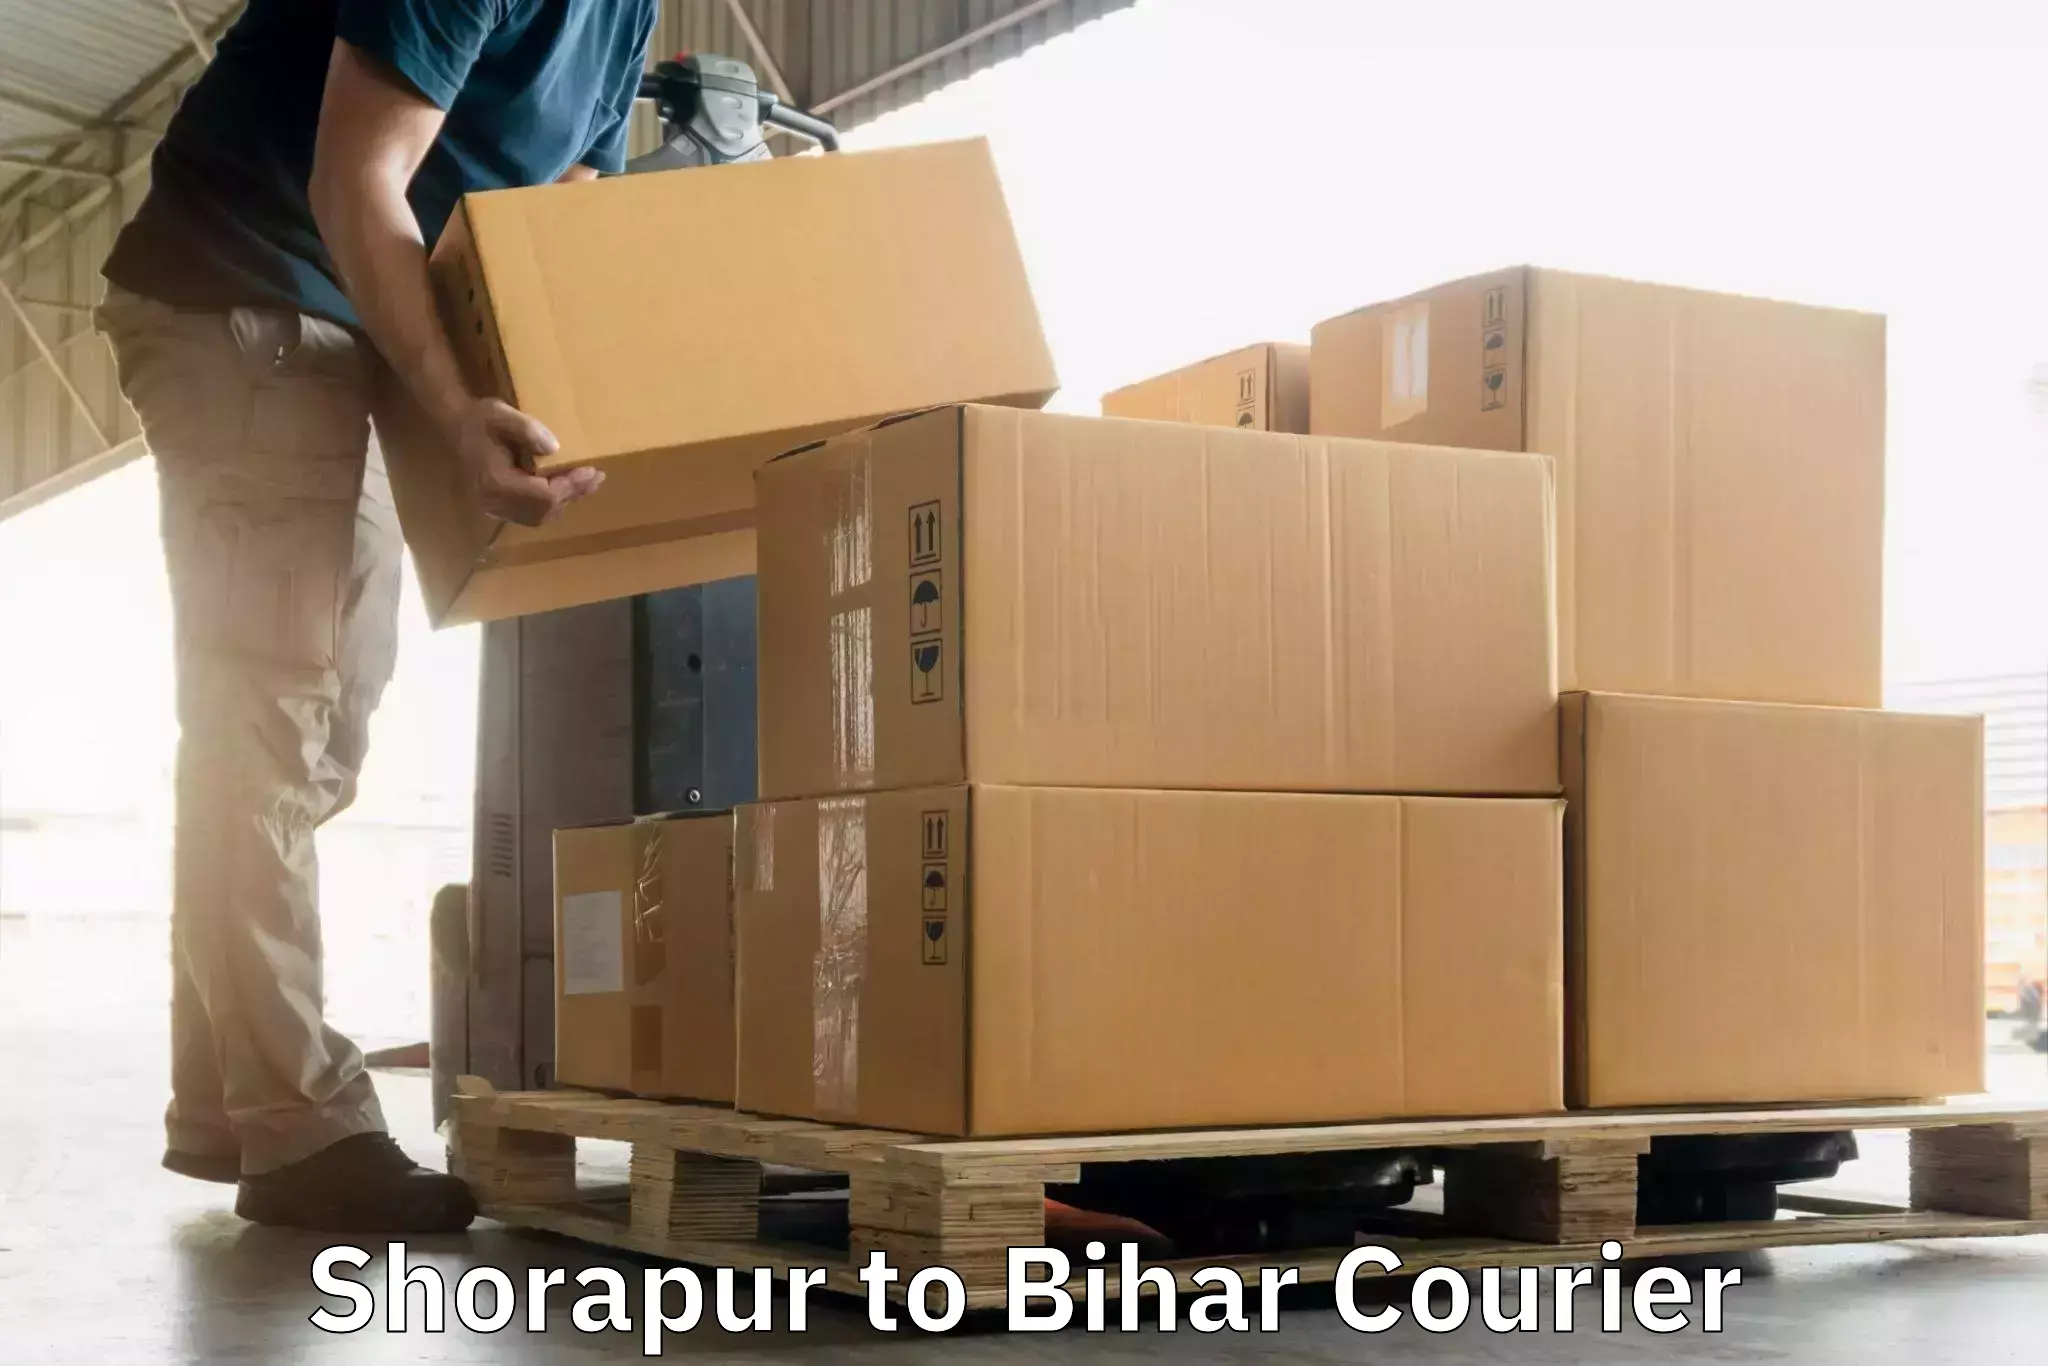 24-hour delivery options Shorapur to Bihar